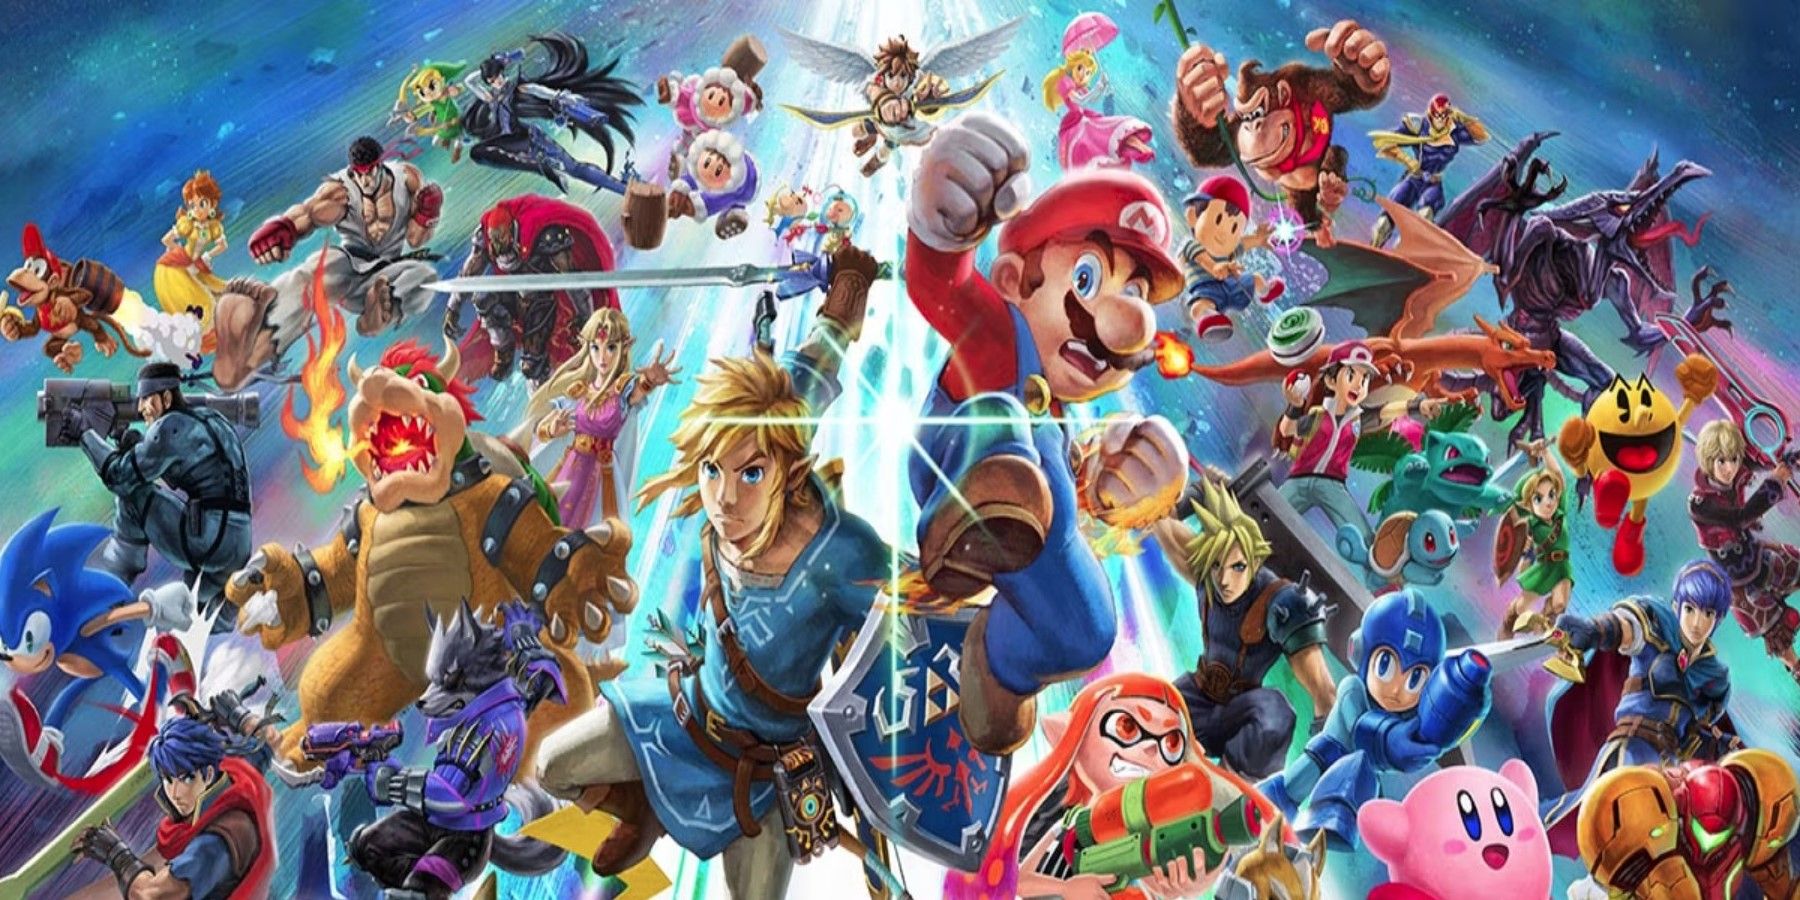 A collection of all the characters from the game Super Smash Bros. Ultimate